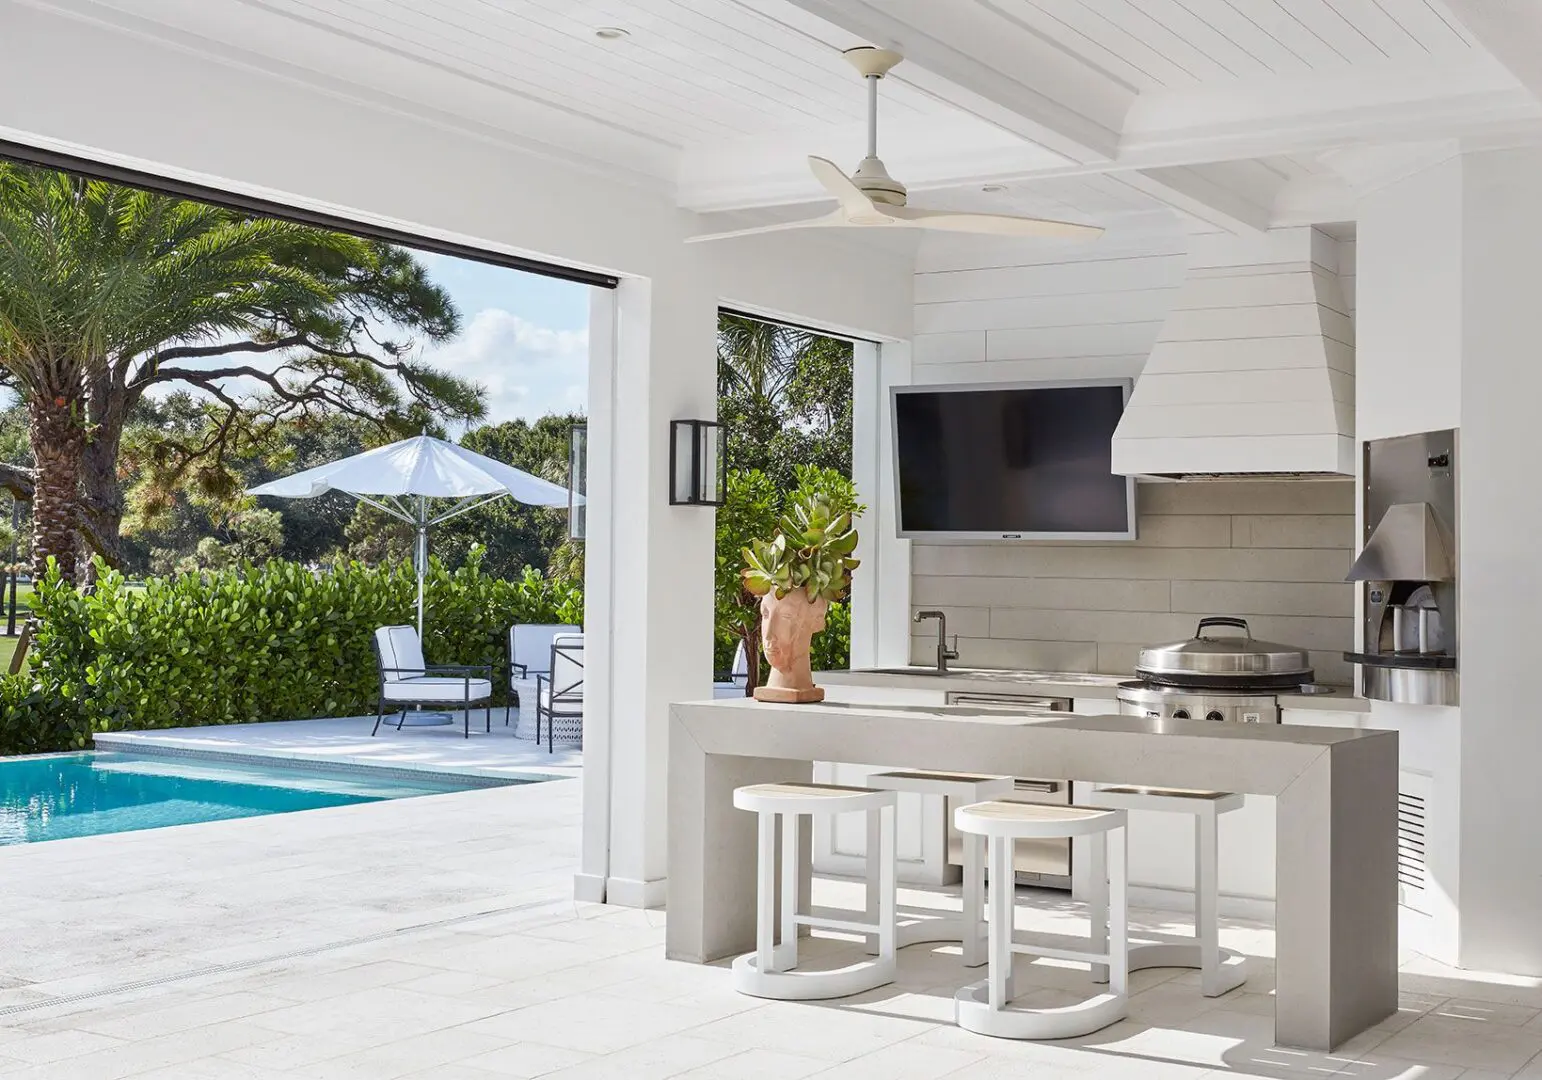 A white outdoor kitchen with an open door to the pool.